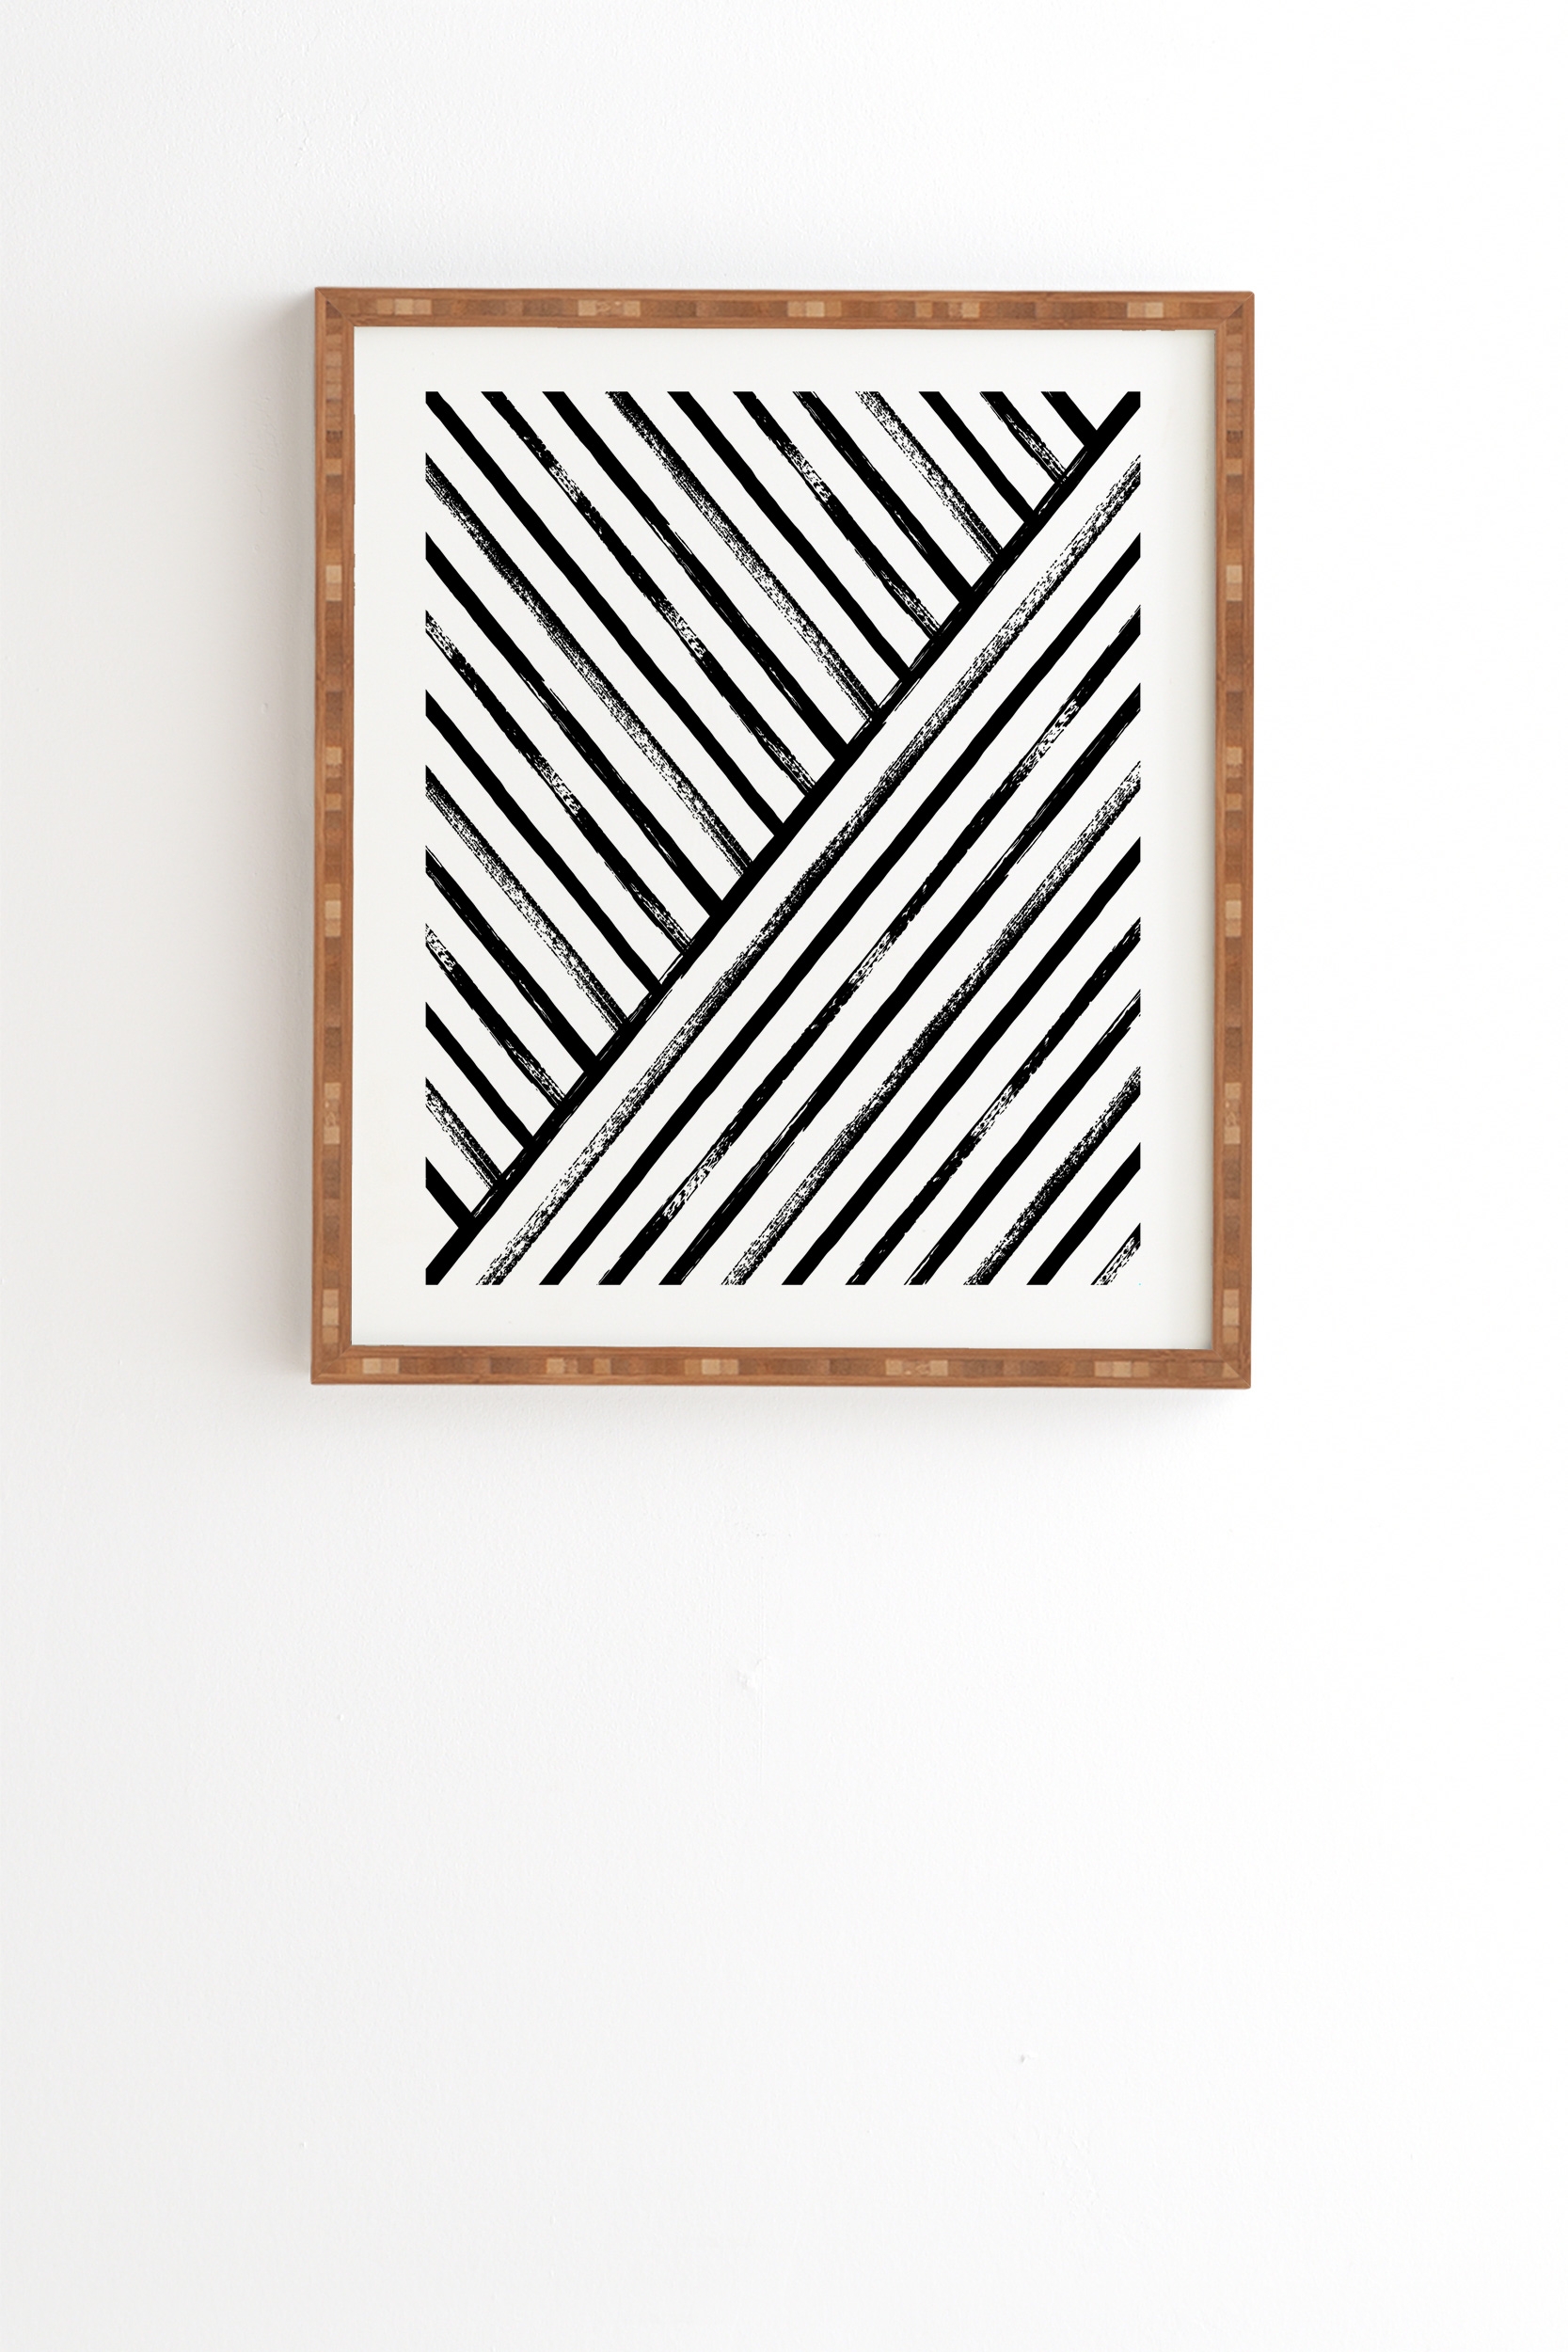 Geometric Stripe Pattern by Kelly Haines - Framed Wall Art Bamboo 19" x 22.4" - Image 0